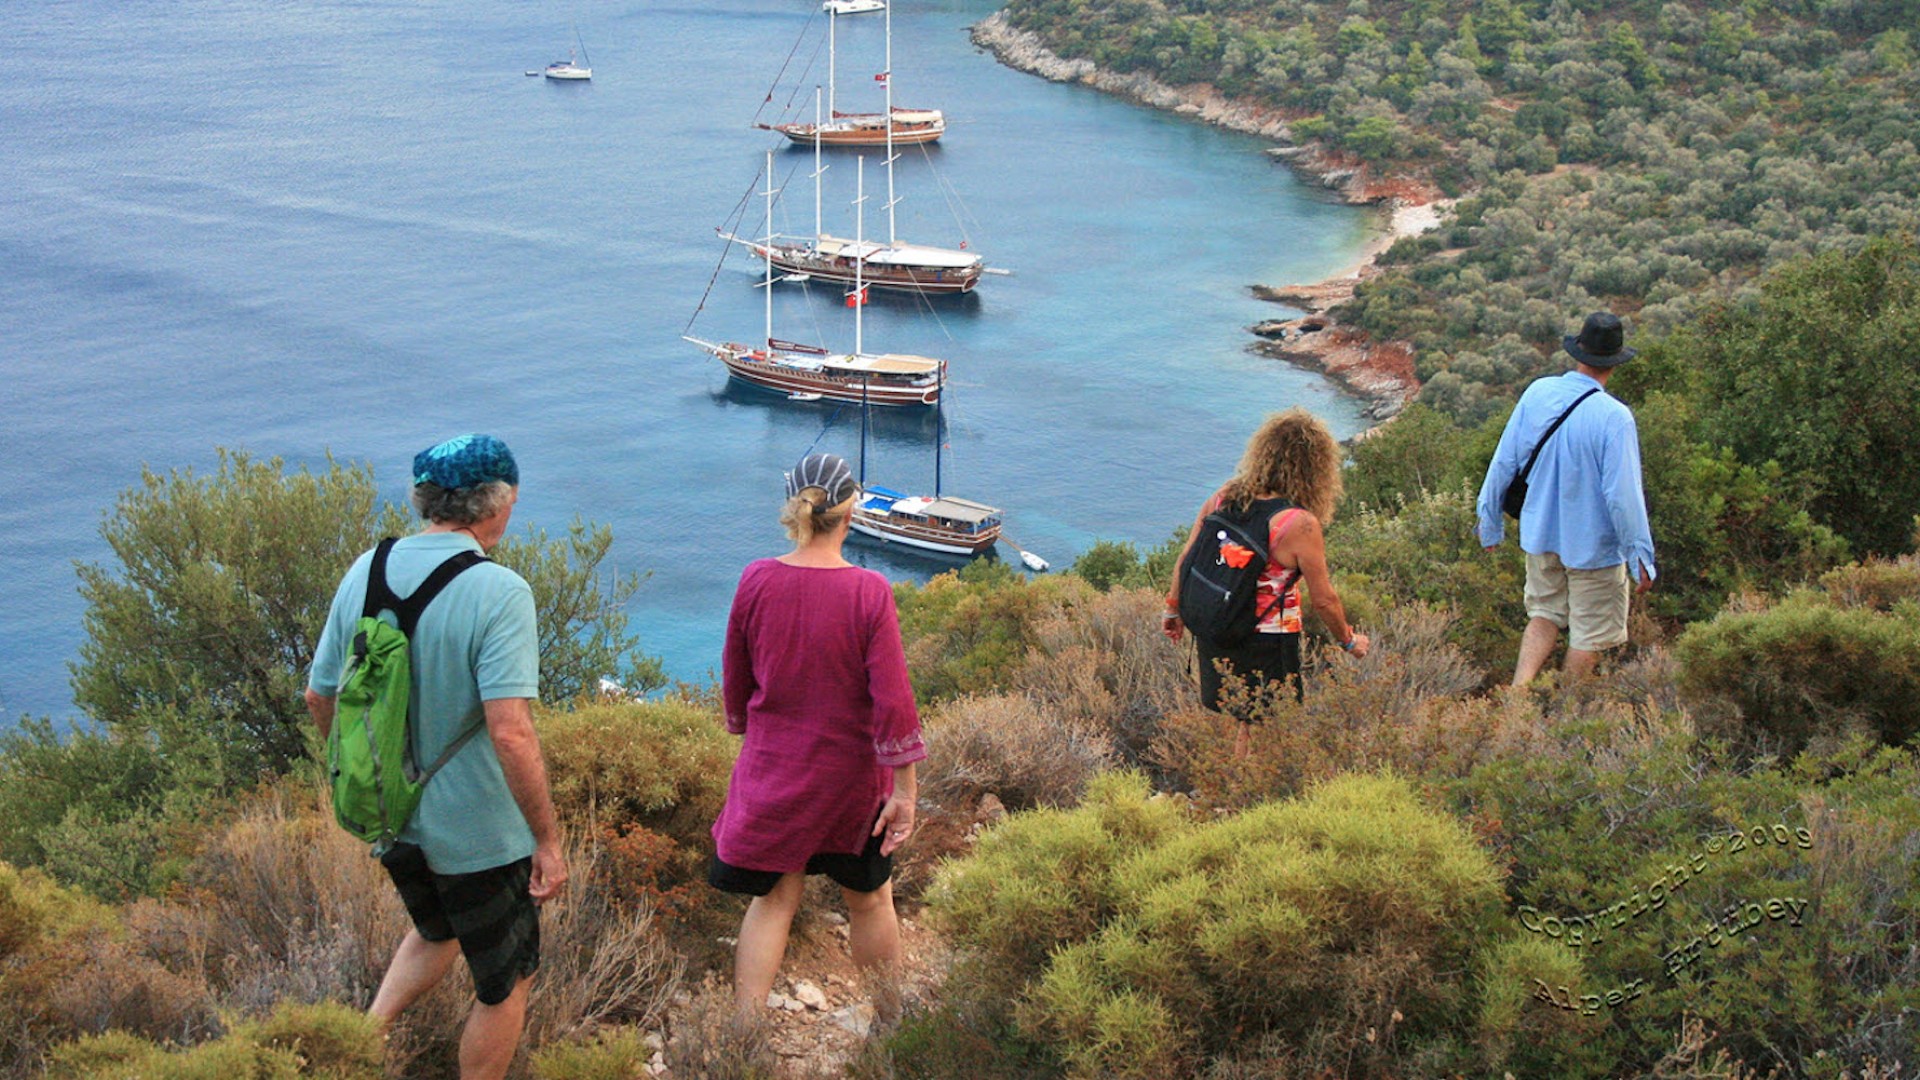 Four people walking across a ridge-line overlooking the sea full of yachts and boats in Turkey